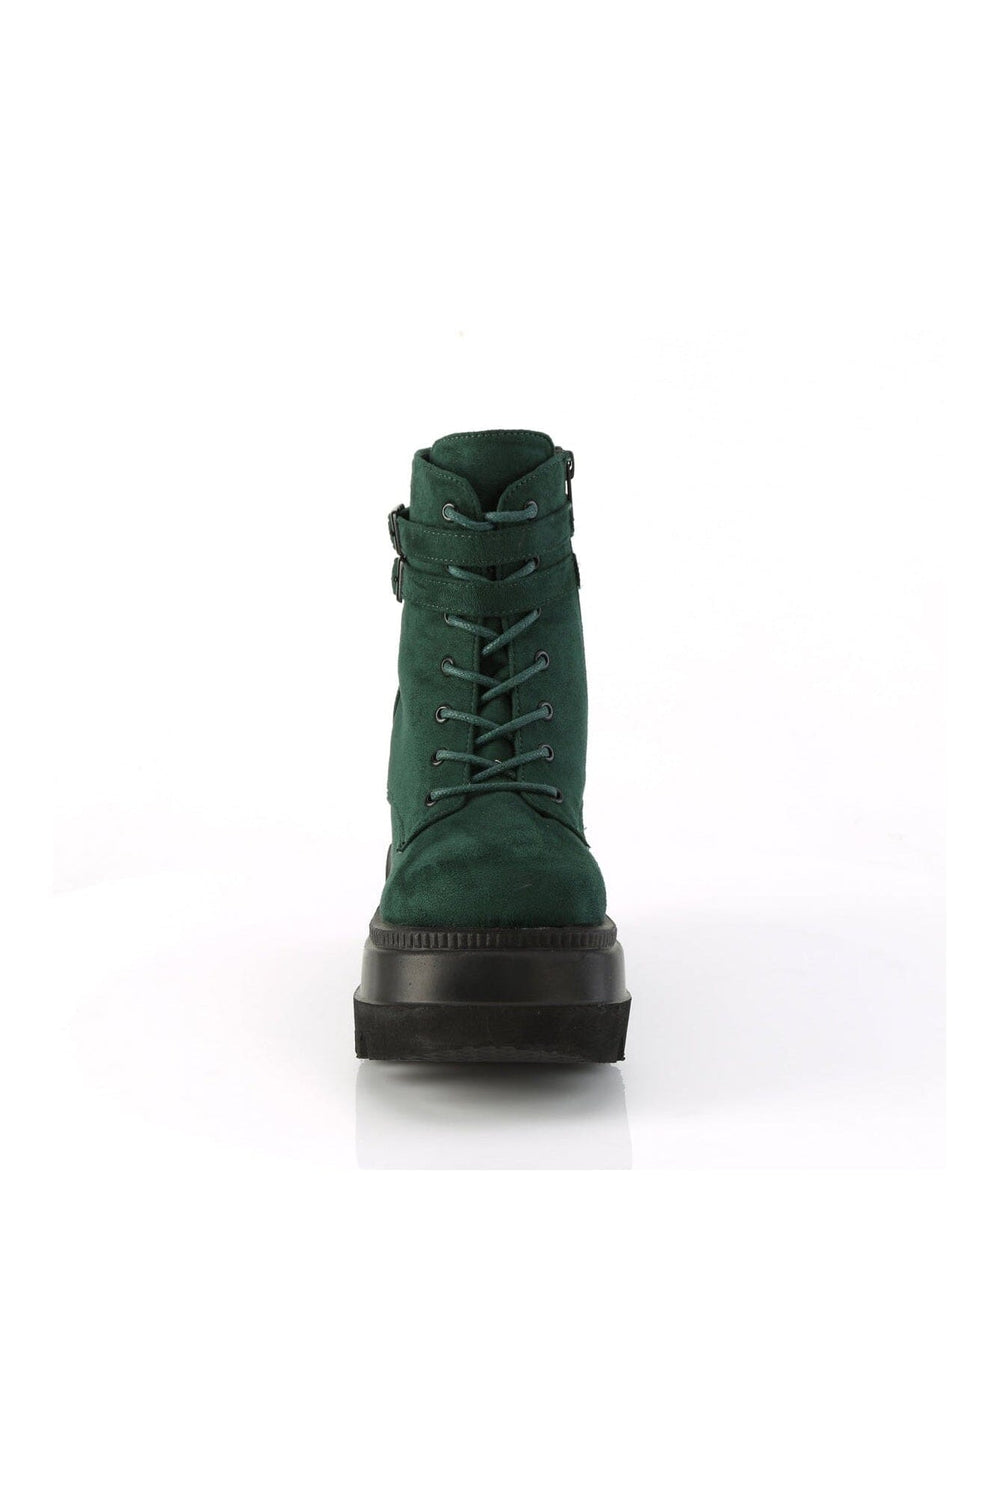 SHAKER-52 Green Vegan Suede Ankle Boot-Ankle Boots-Demonia-SEXYSHOES.COM